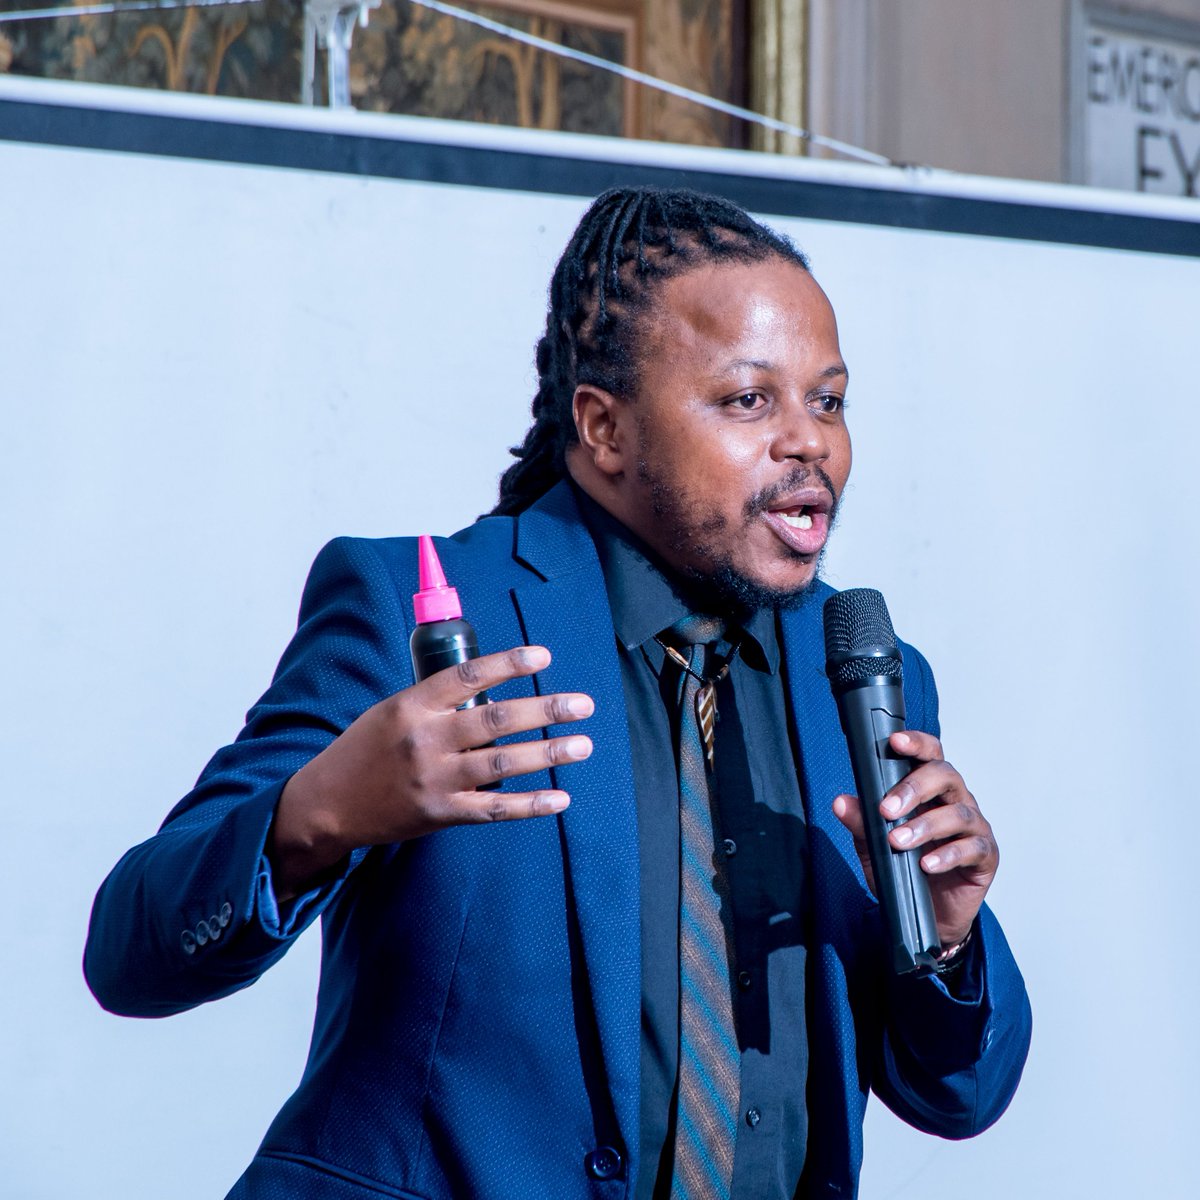 Was honoured to produce and MC the @feso_zim relaunch event in Harare last weekend. Dr Kuda Mupawose is doing incredible work for #AfricanHair and she had a great set of Doctors who shared incredible insights on #health #healthandhair #hairhealth #healthcare #hair #haircare